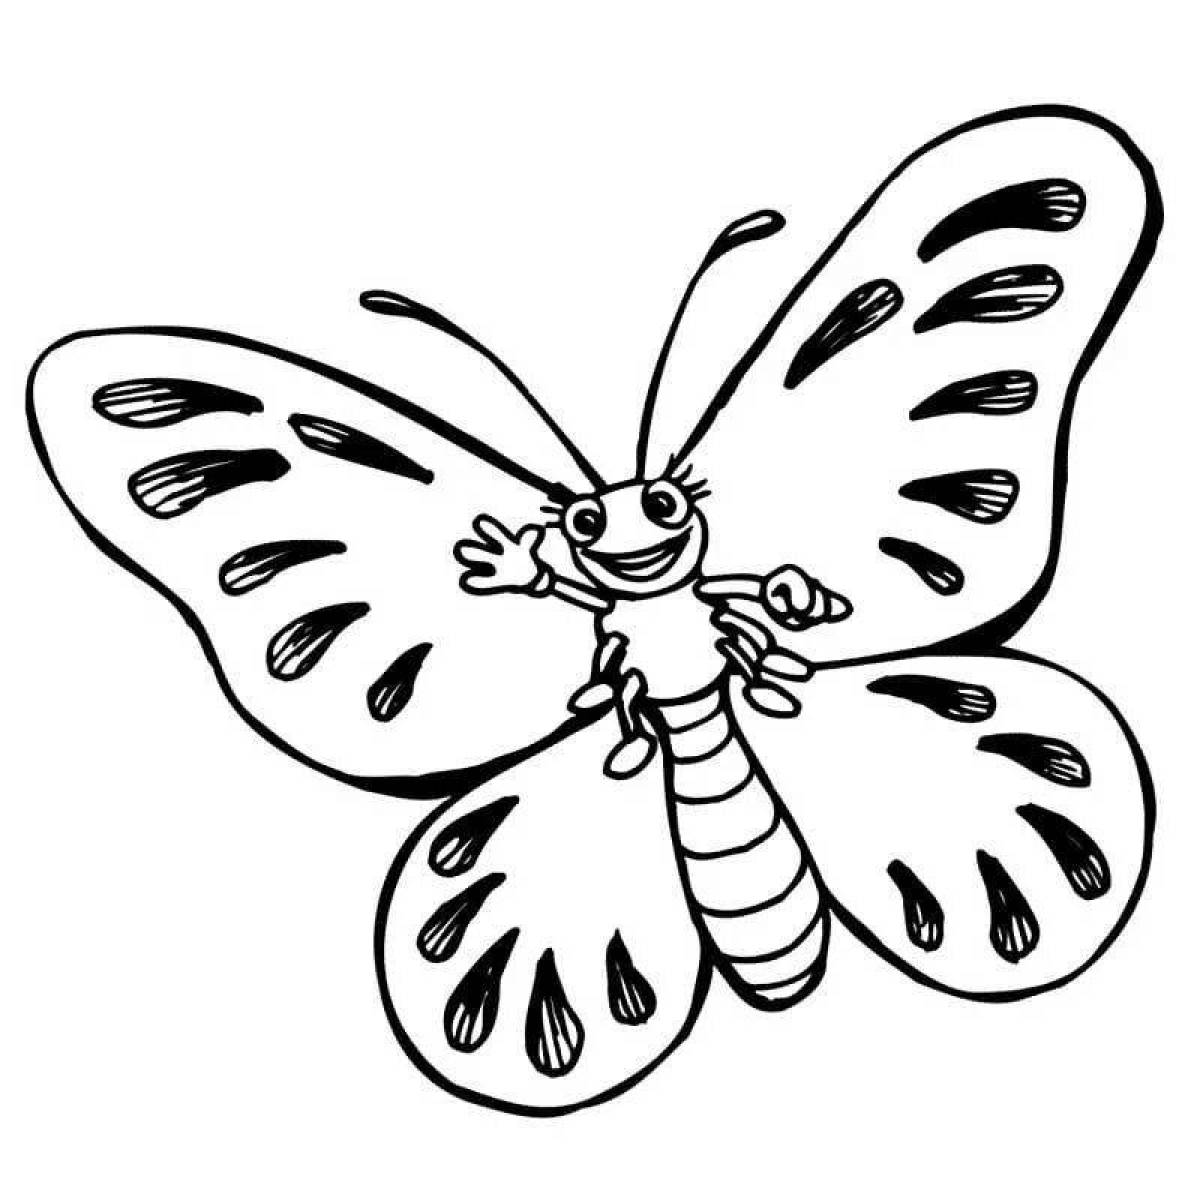 Playful butterfly coloring book for 5-6 year olds